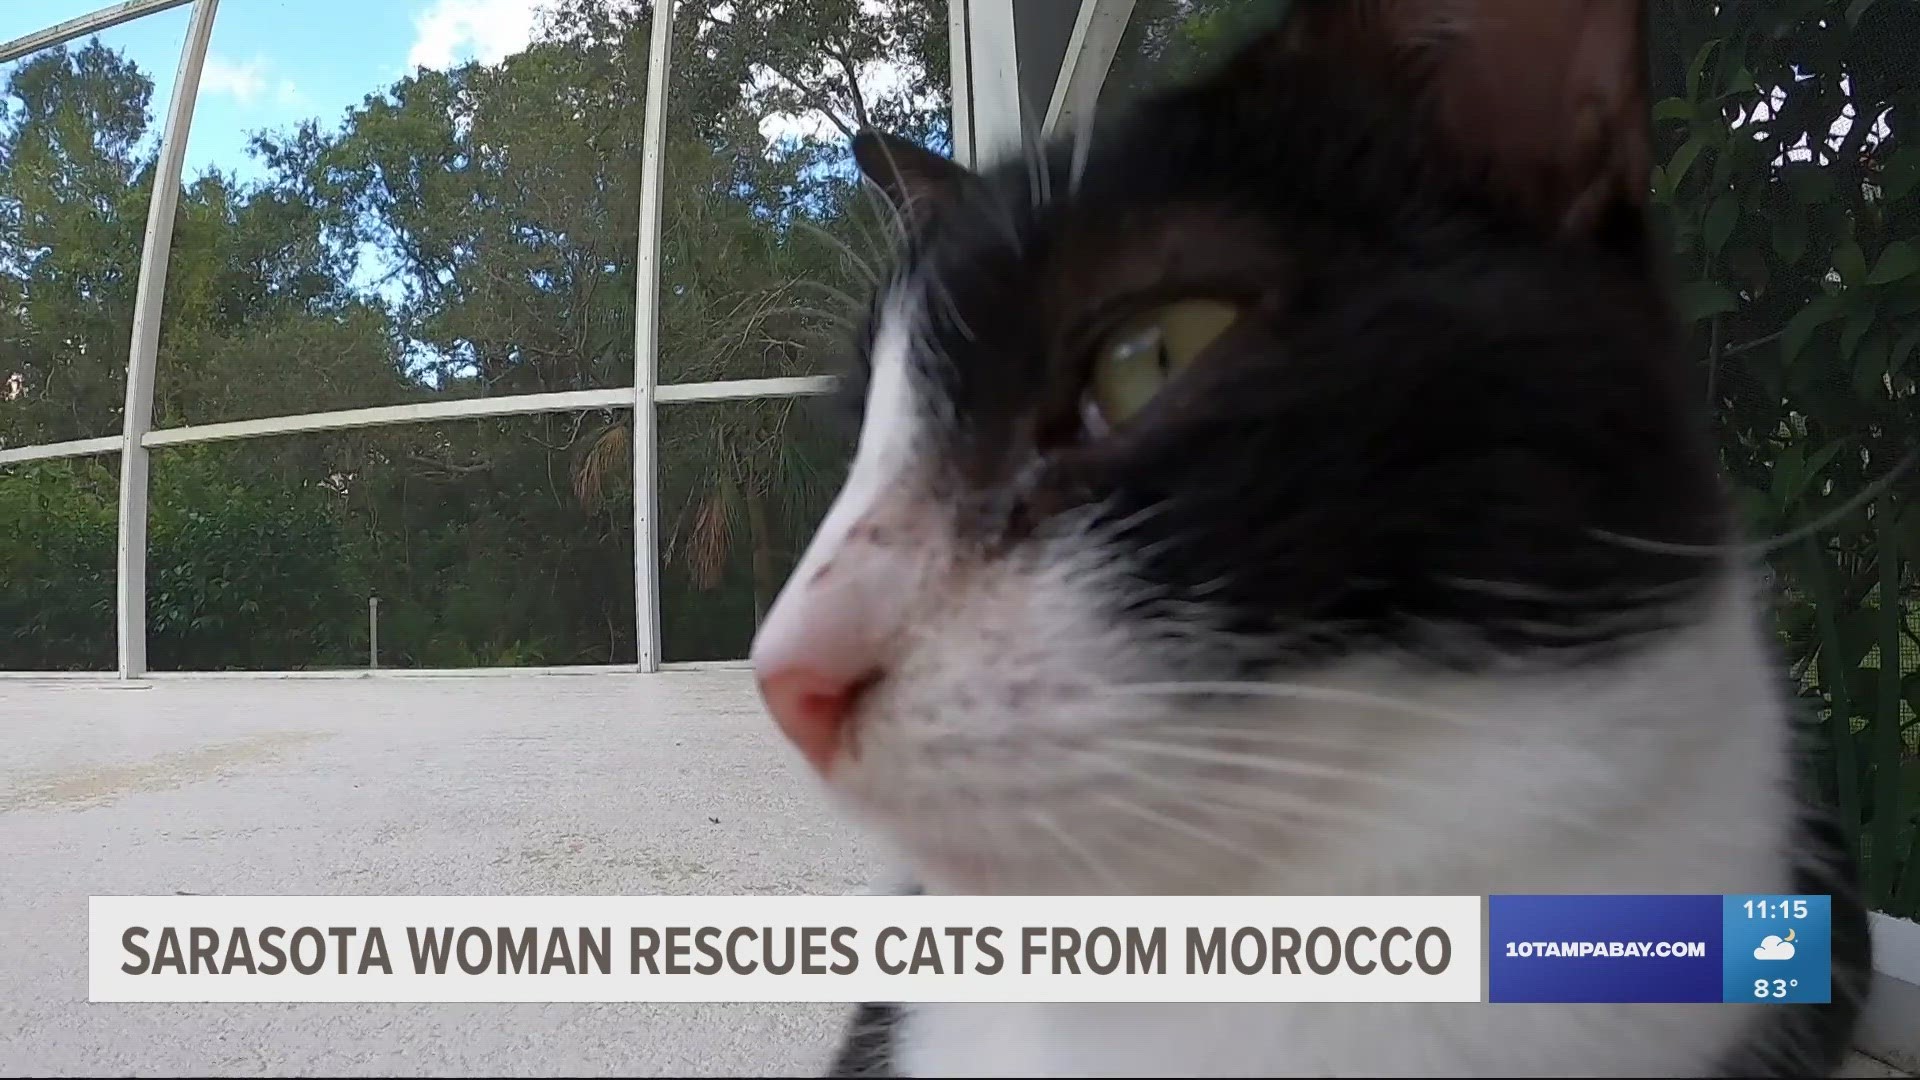 One woman from Sarasota has made it her mission to rescue cats from Morocco.